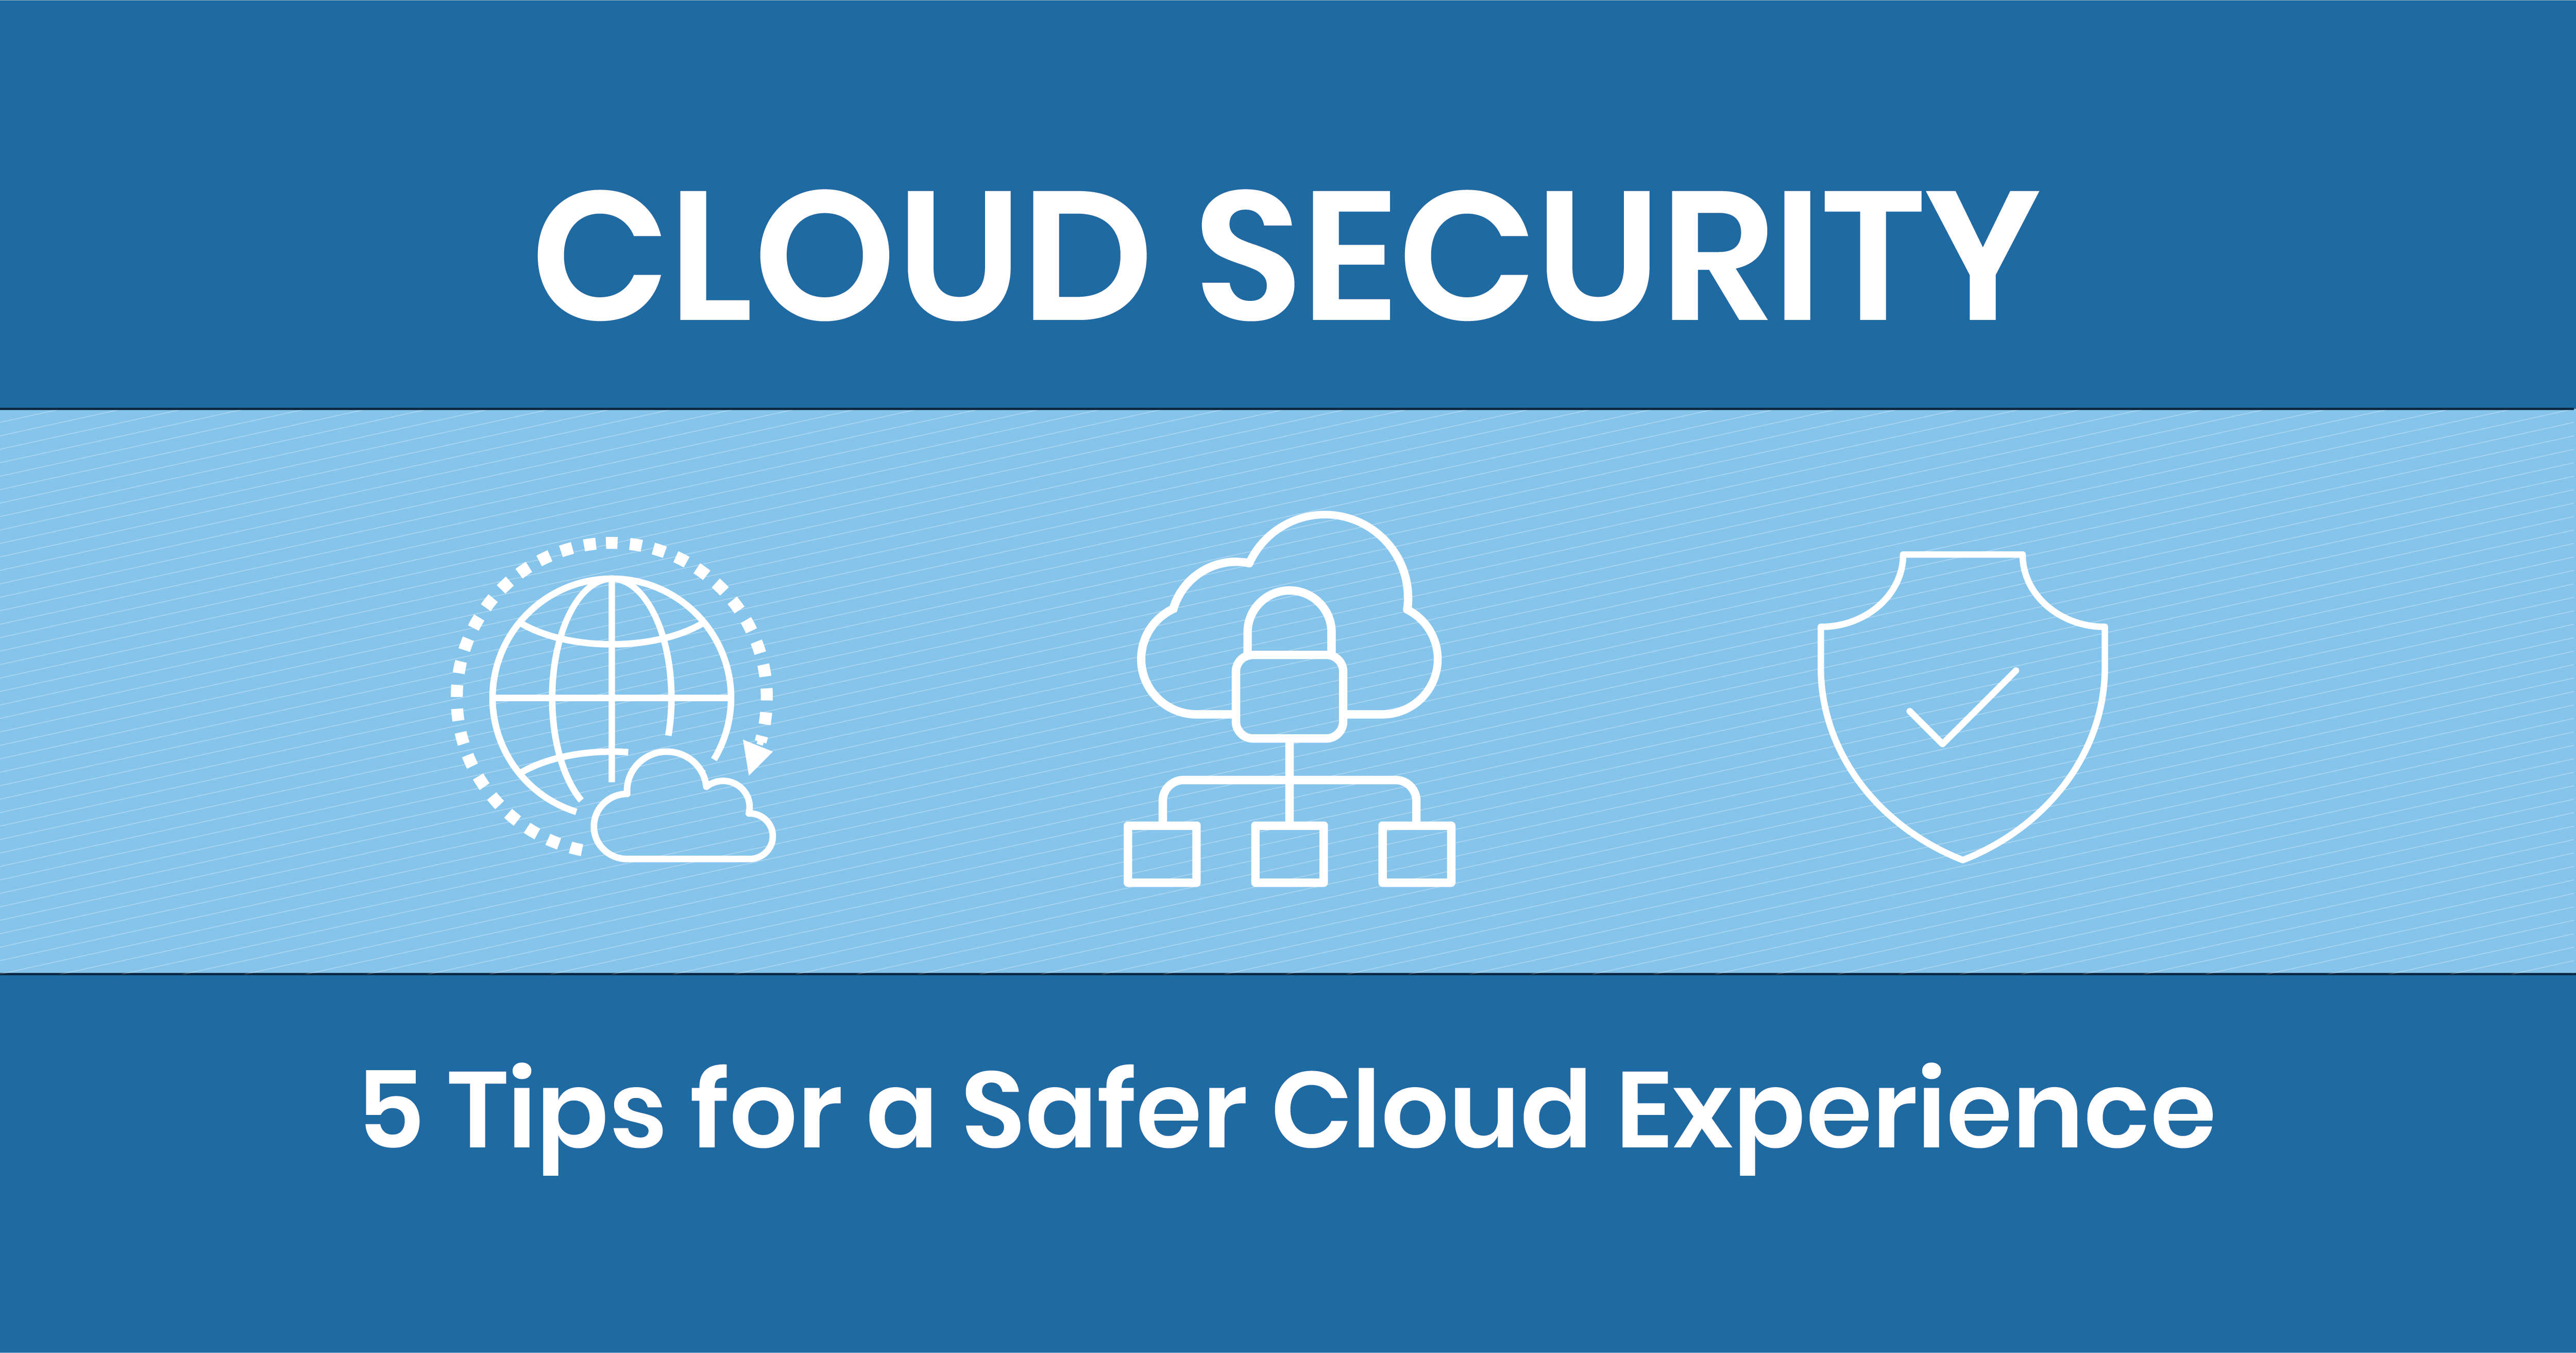 Insurers: 5 Tips for a Safer Cloud Experience Illustration